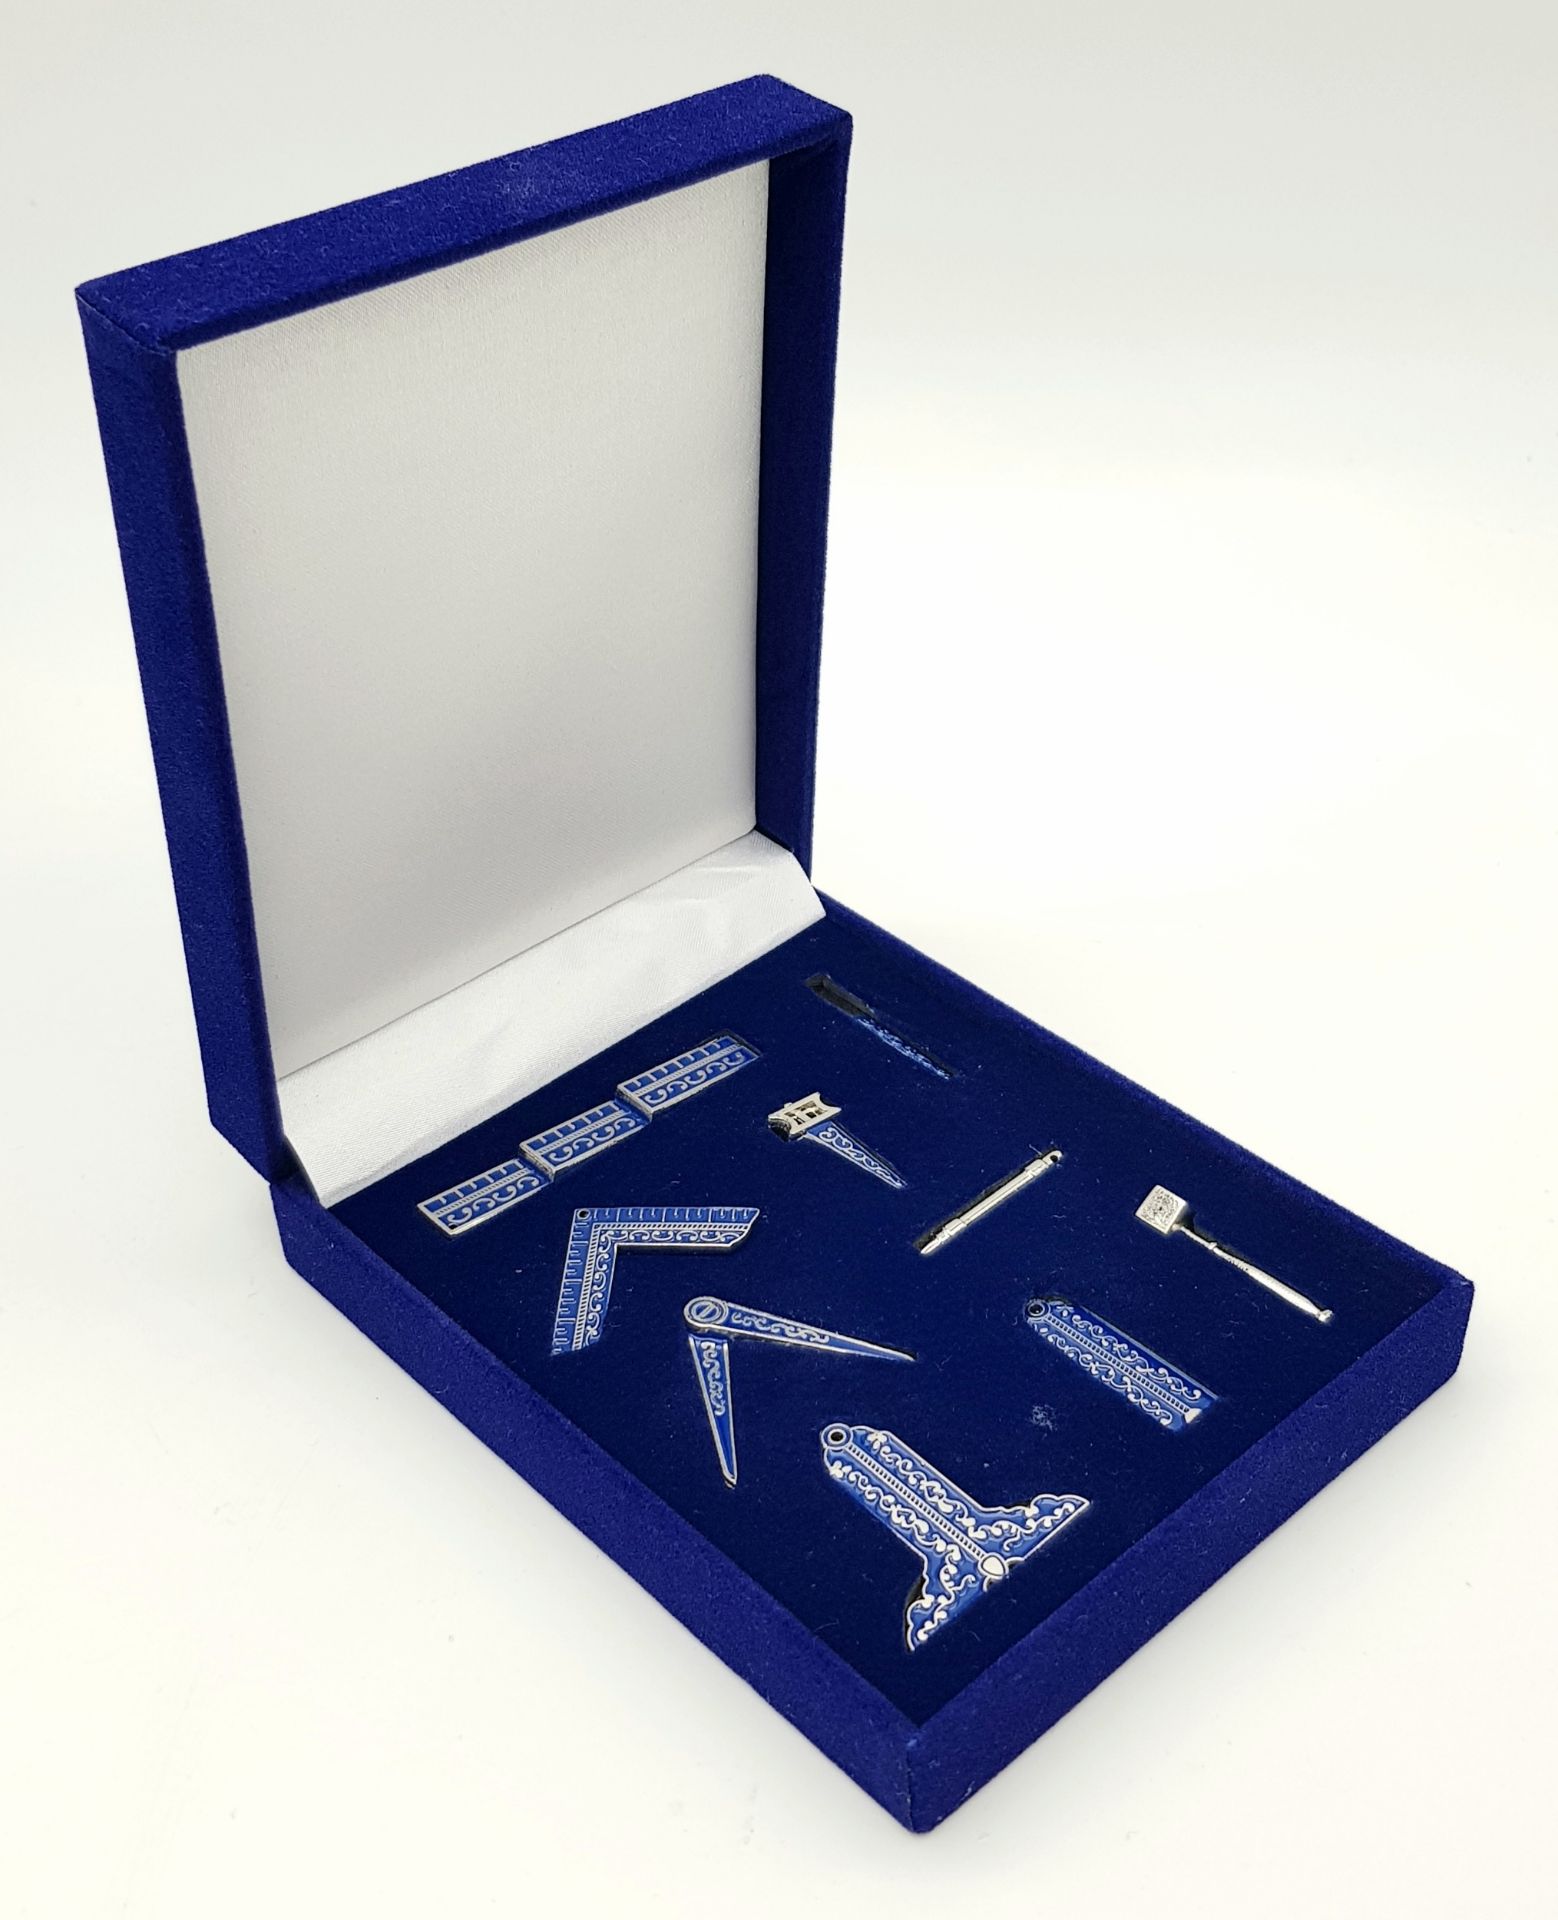 A miniature set of Masonic Working Tools for all Three Degrees. Perfect for training and rehearsals, - Image 6 of 6